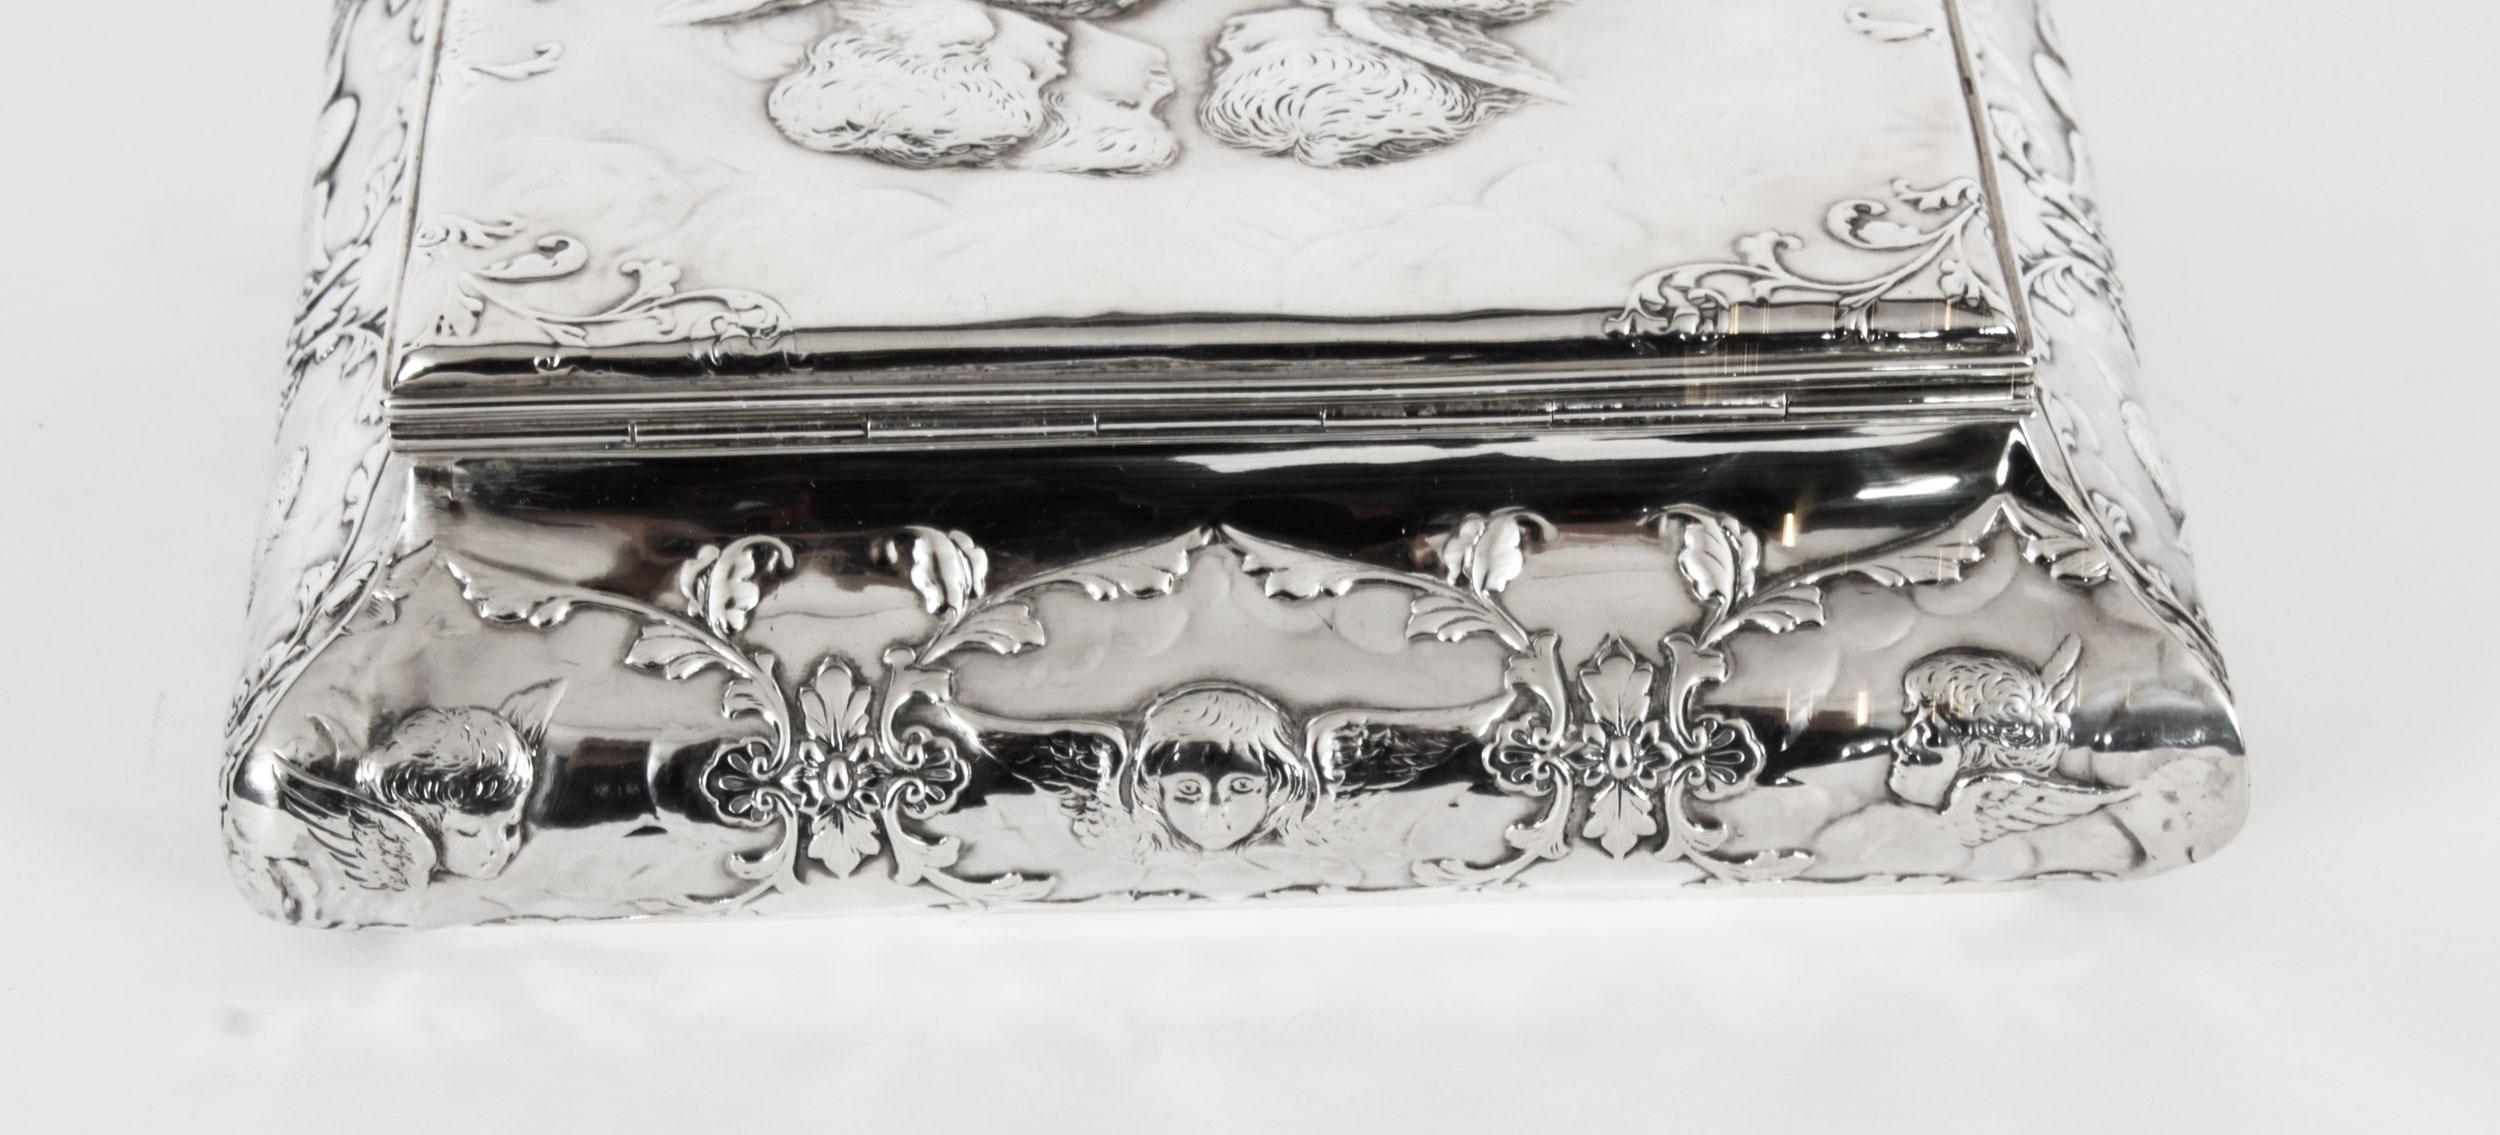 Antique Victorian Sterling Silver Casket by William Comyns & Sons 1898 For Sale 6